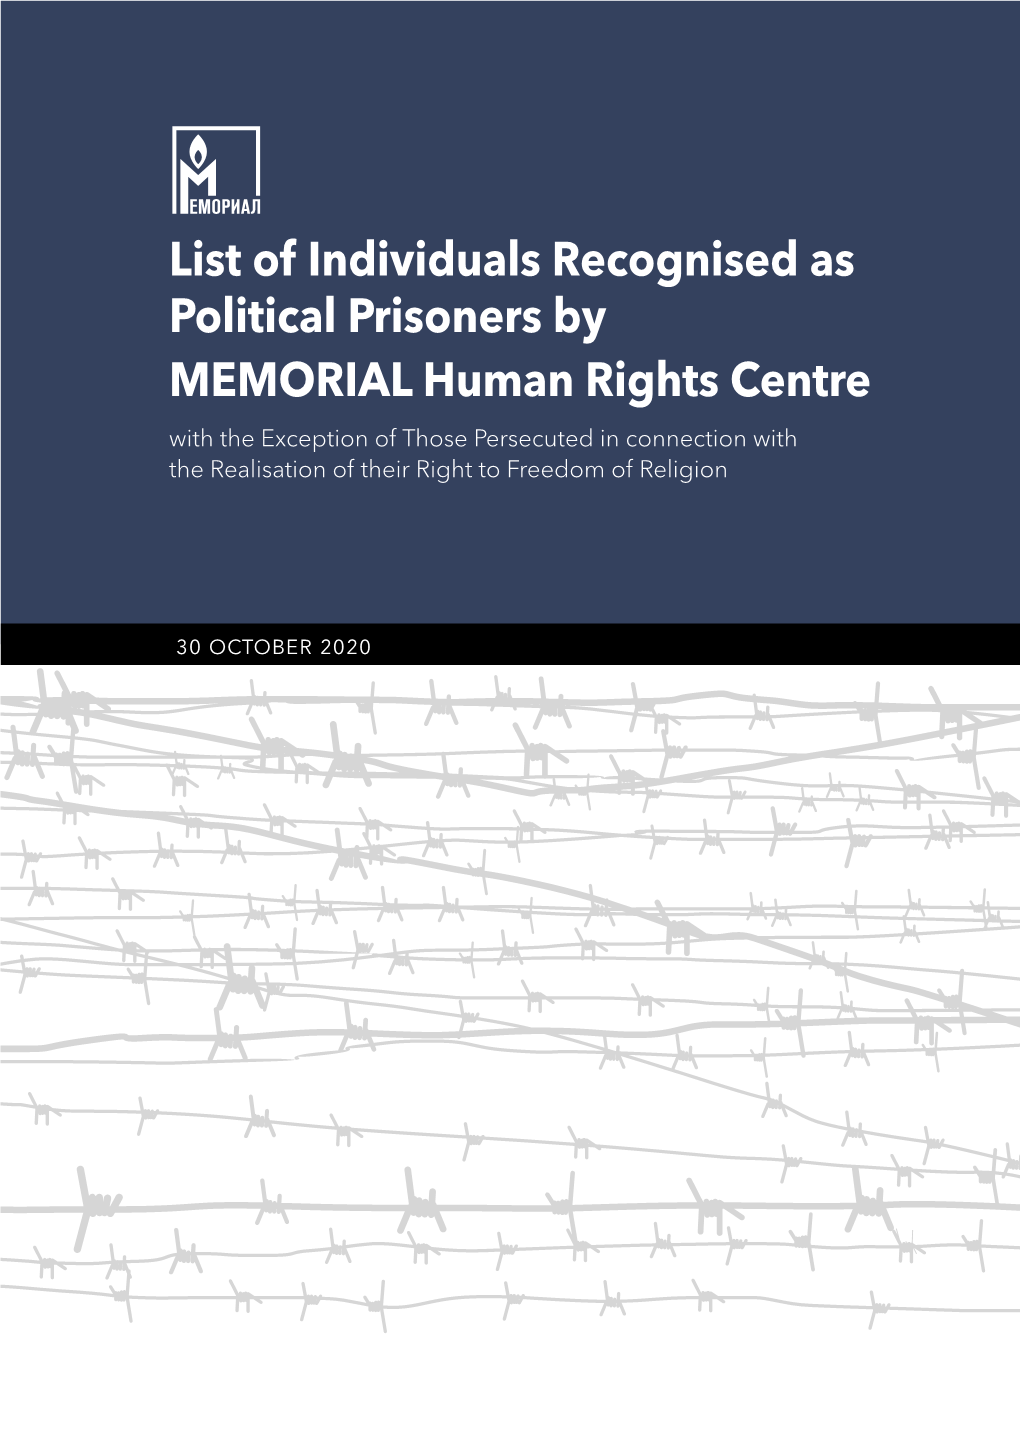 List of Individuals Recognised As Political Prisoners by MEMORIAL